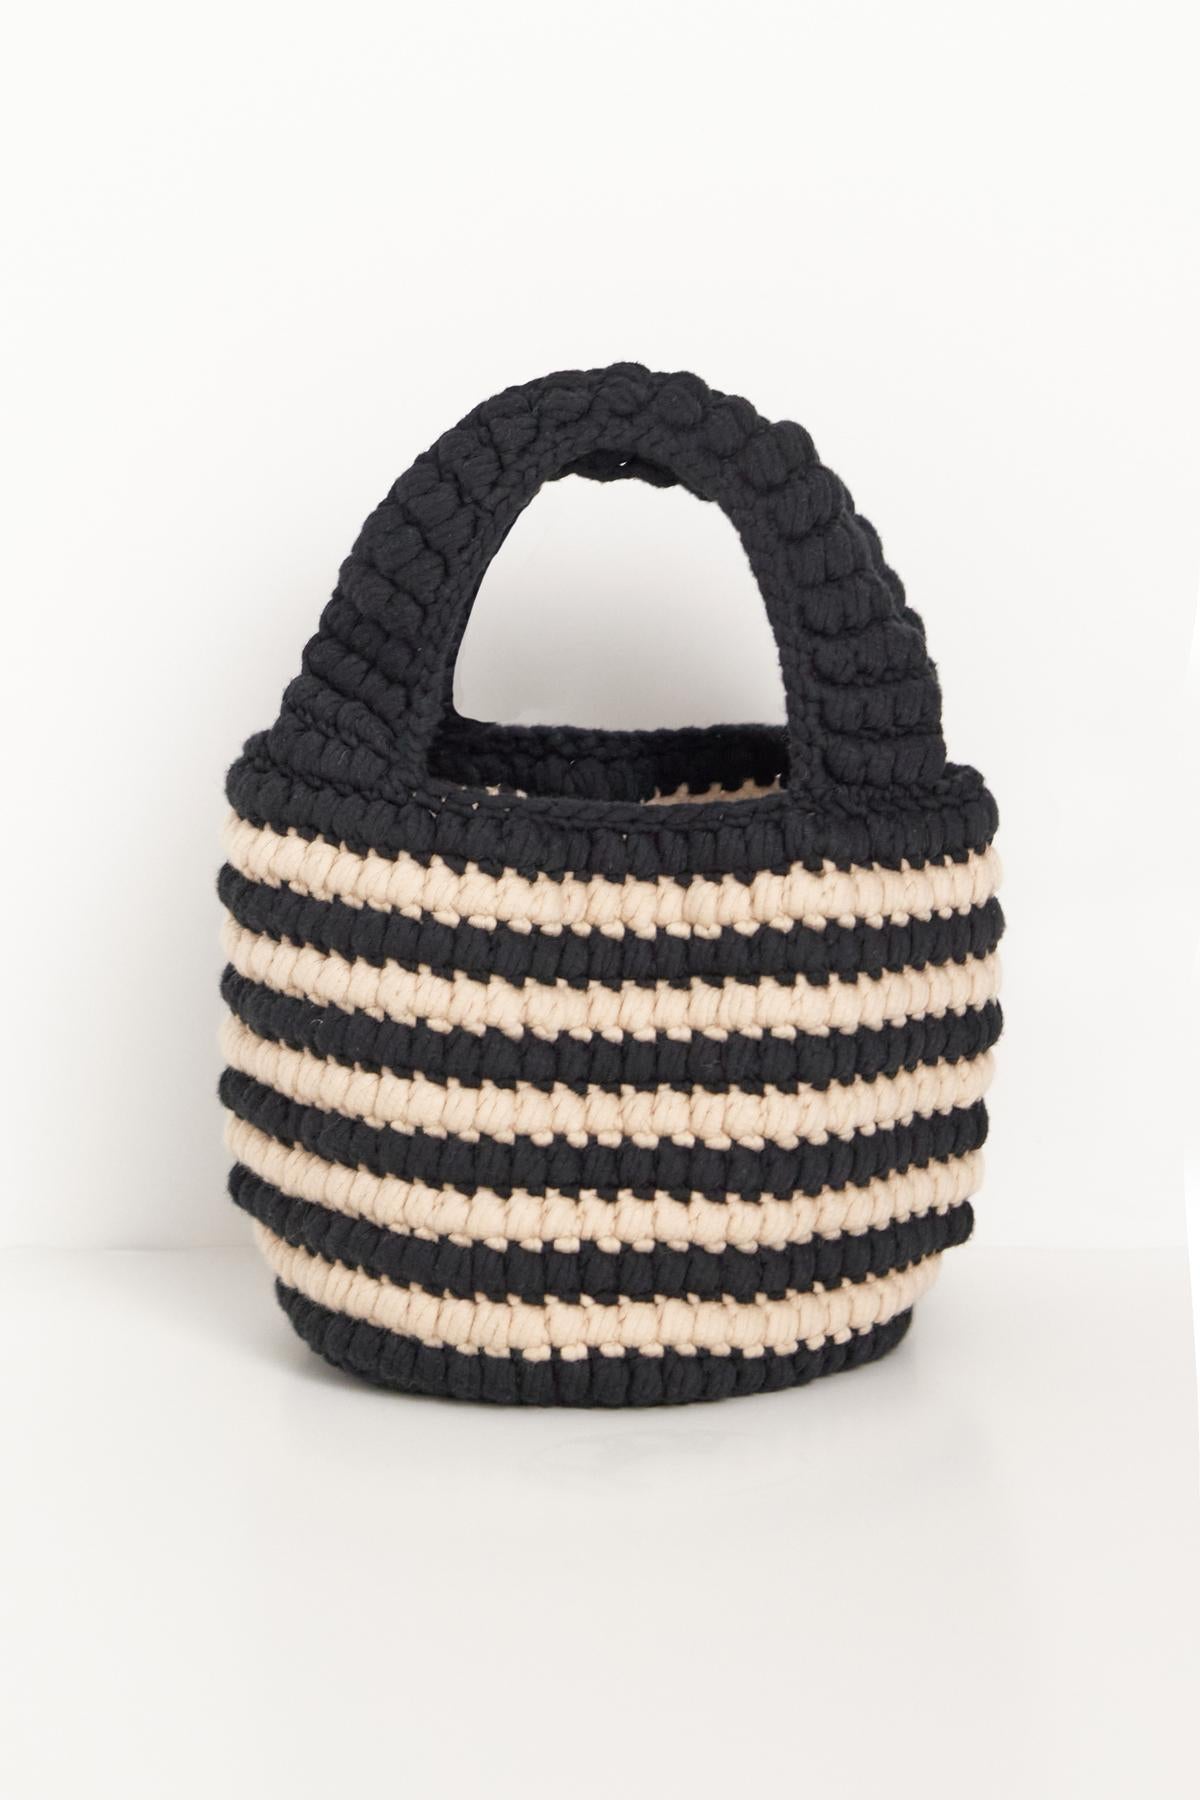 A handmade KNOX BAG crochet knit bag with alternating black and beige stripes, featuring a sturdy loop handle, displayed against a white background. Brand Name: Velvet by Jenny Graham-36890597851329